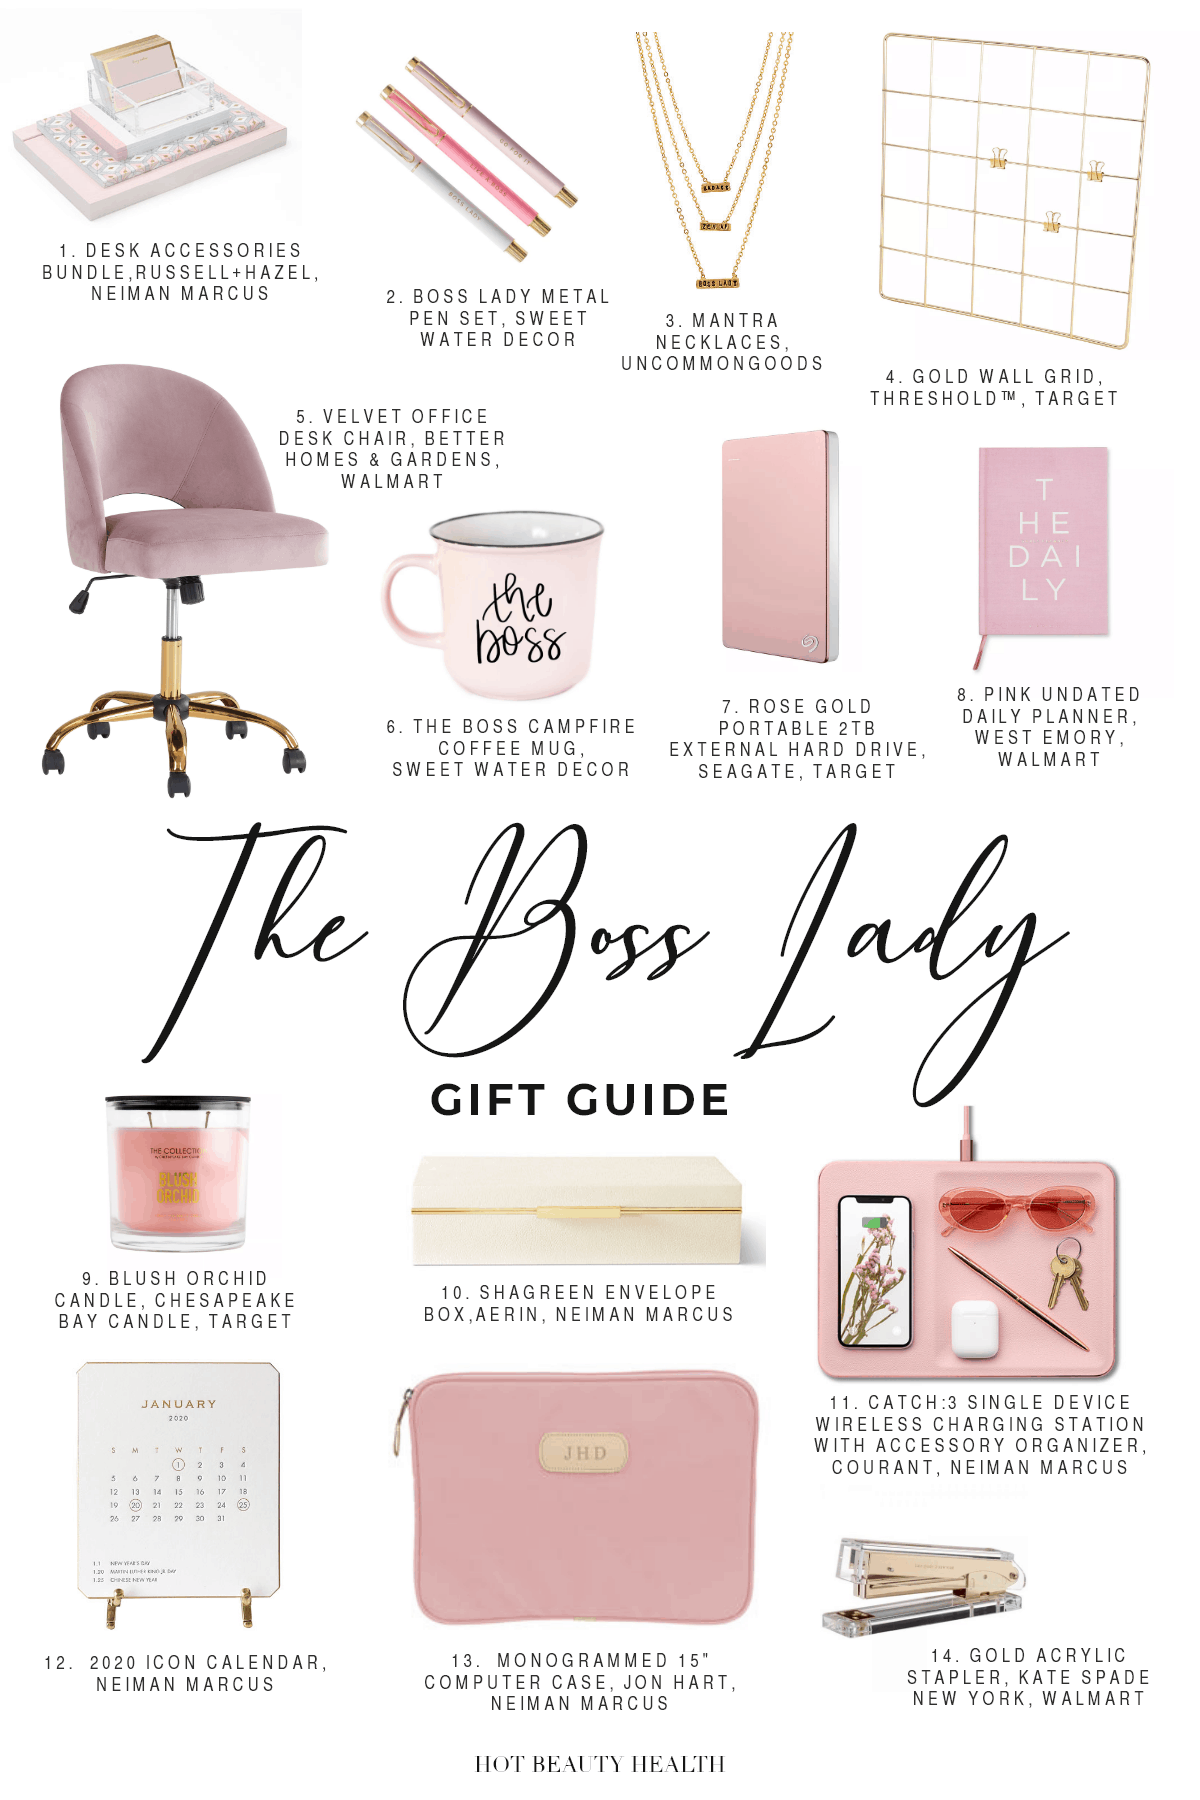 https://www.hotbeautyhealth.com/wp-content/uploads/2019/11/the-boss-lady-gift-guide.png